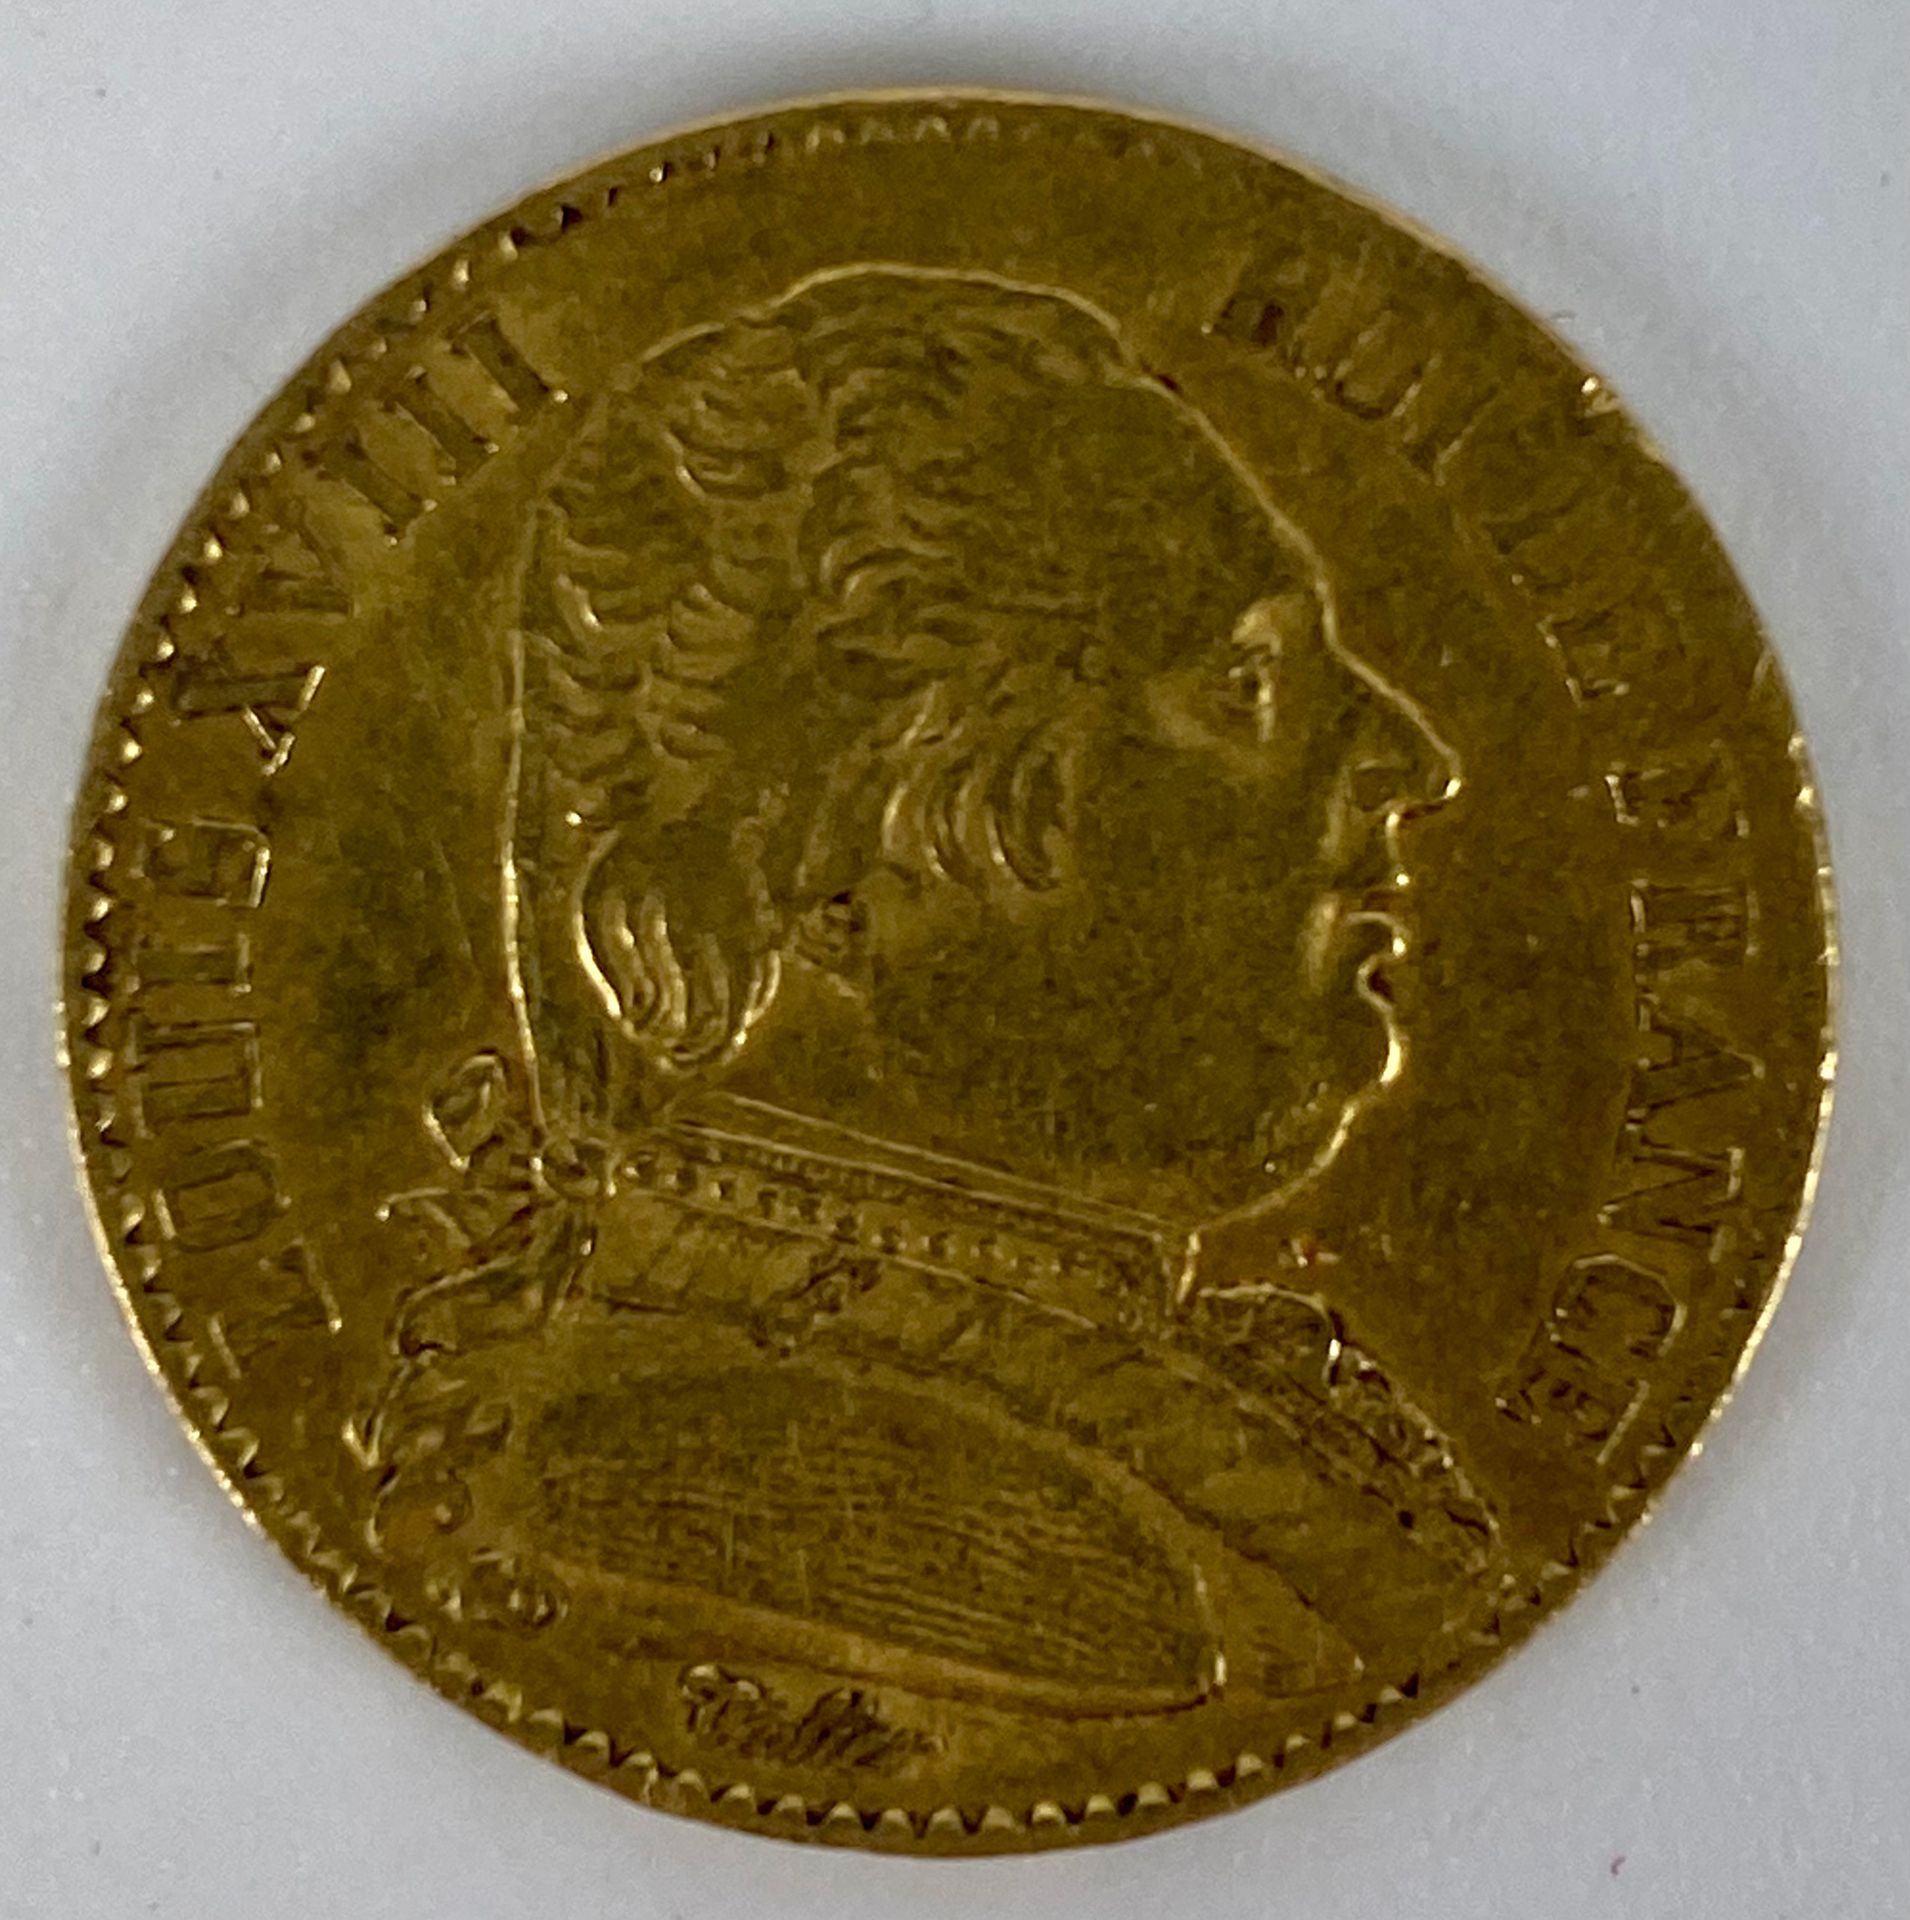 Null LOUIS XVIII (1755-1824) 20 francs gold 1815 Weight: 7 g